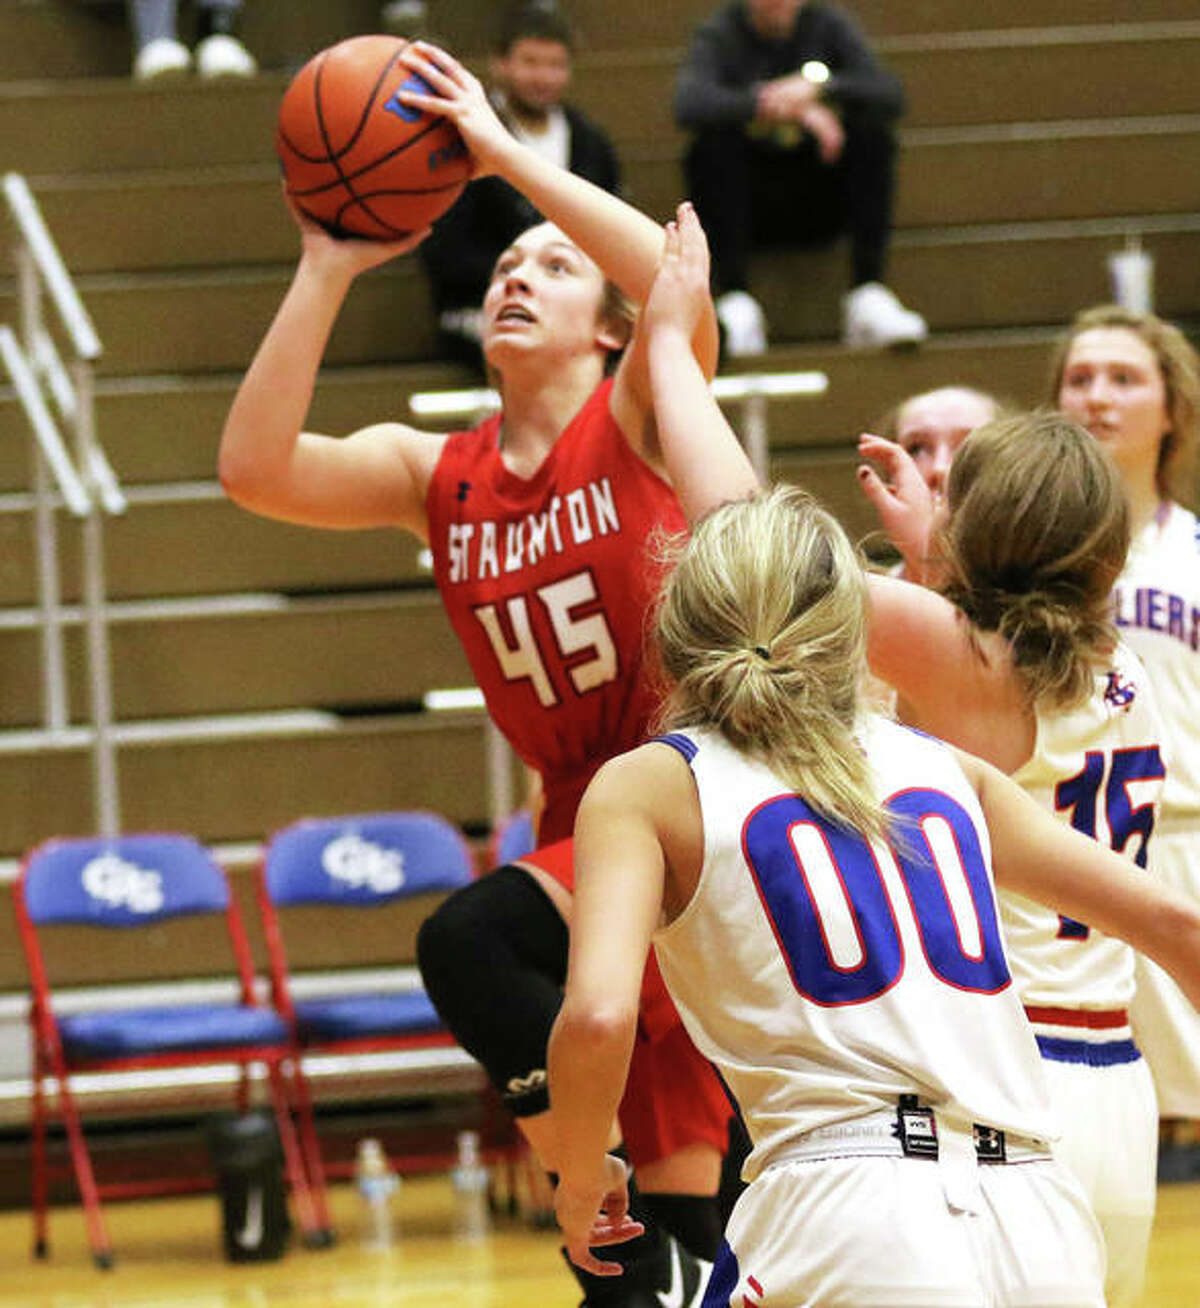 Staunton's  Haris Legendre (45) scored 10 points in her team's 40-28 victory over Carlinville Thursday night in Carlinville.